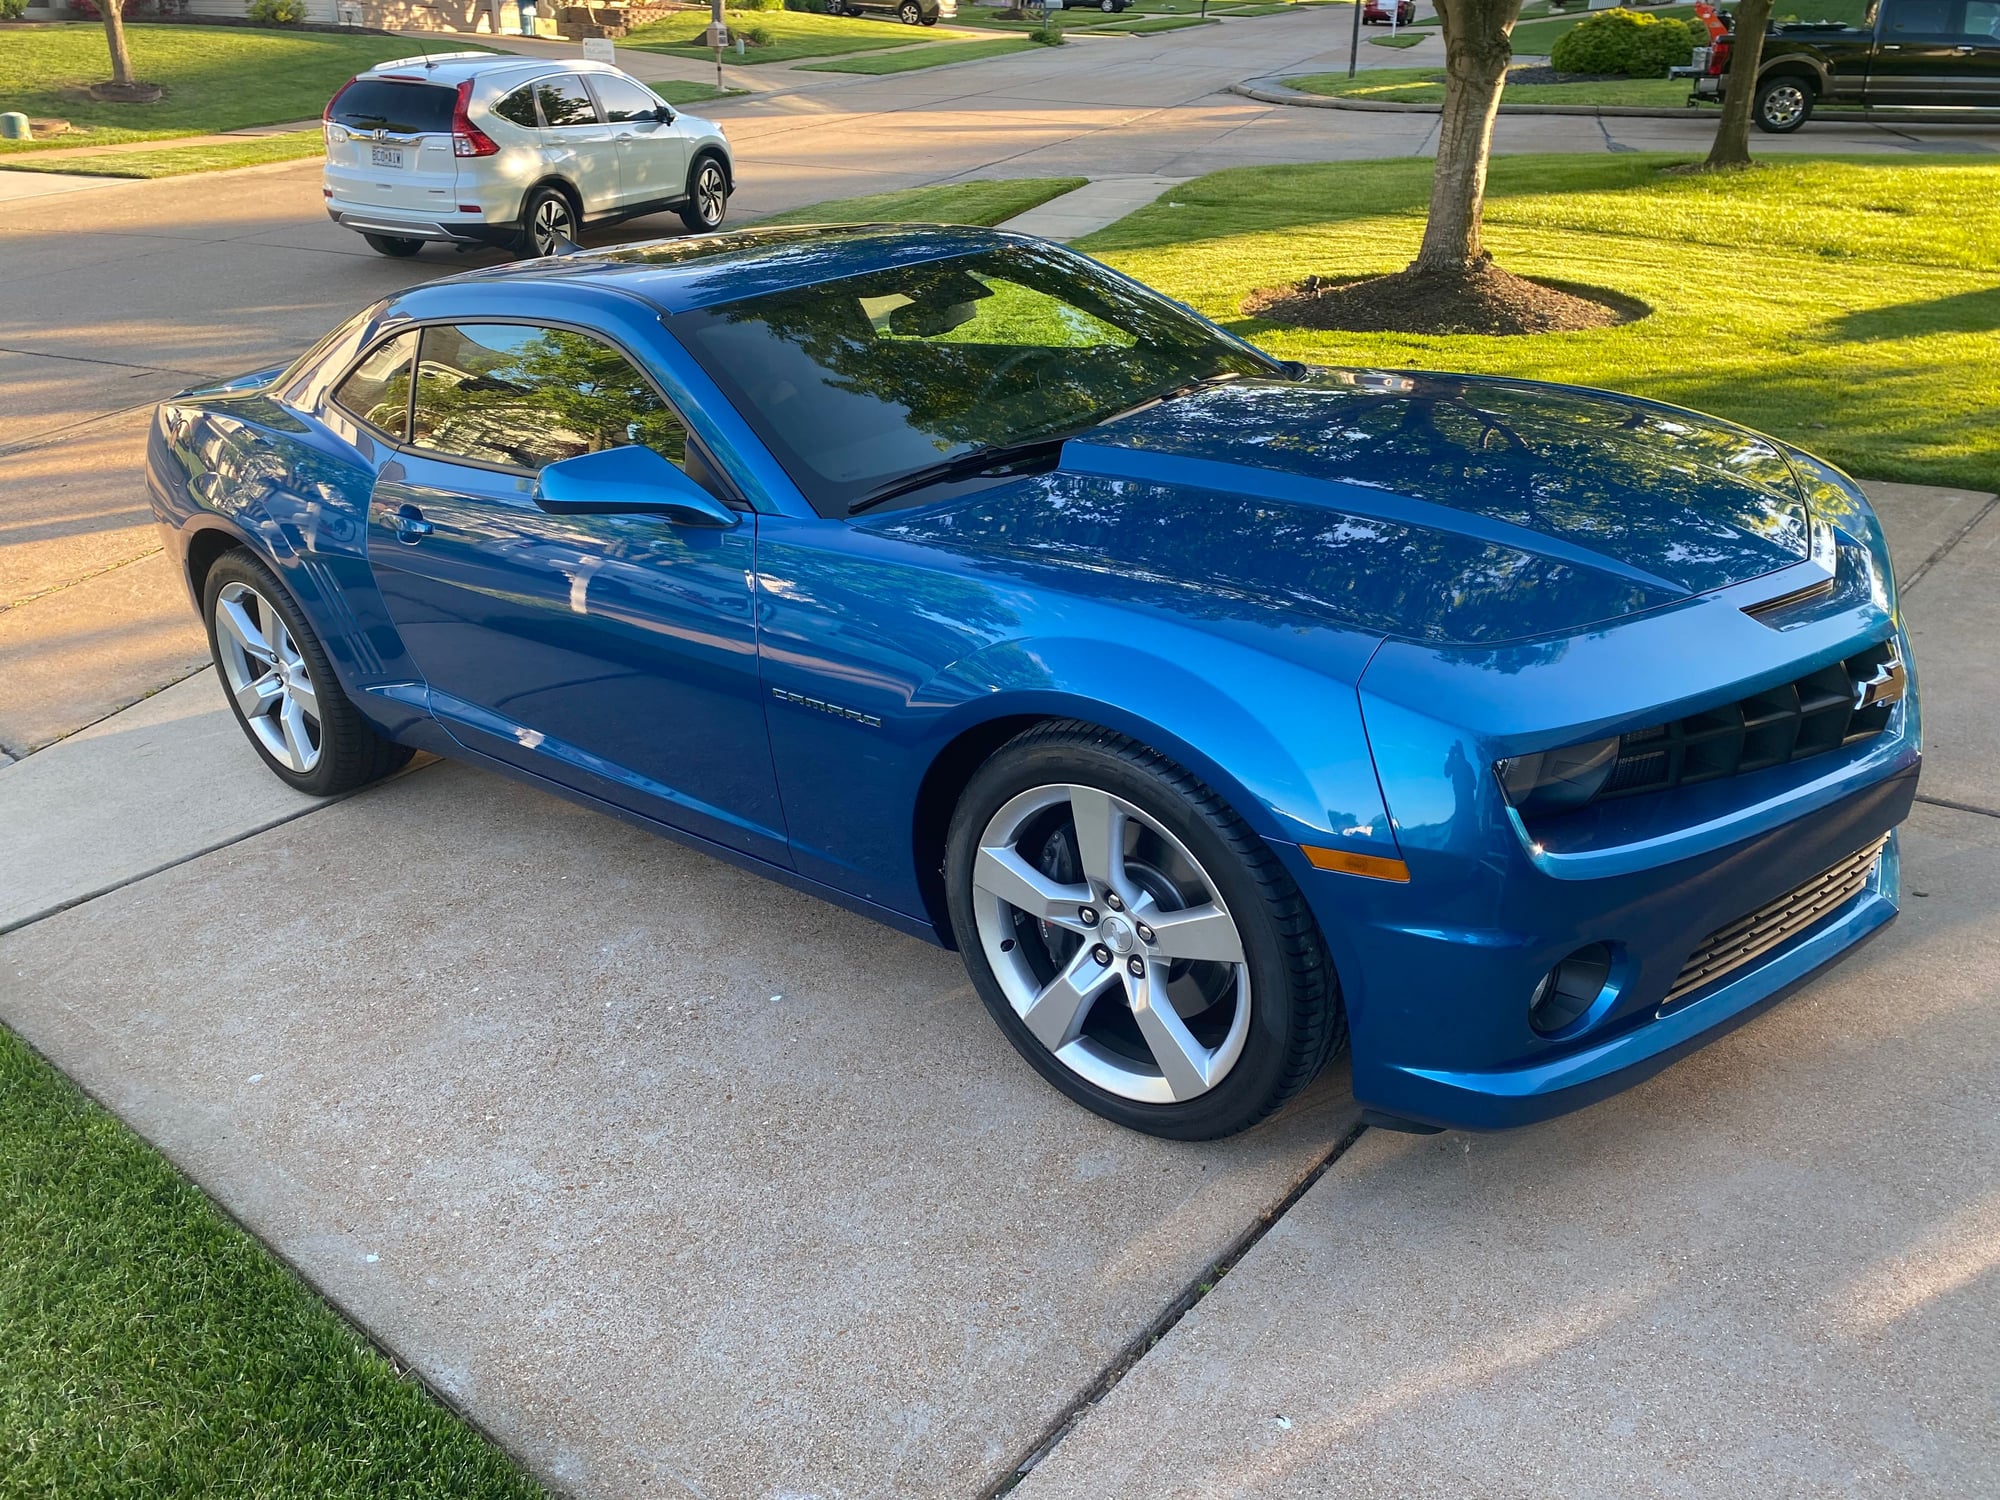 2010 Chevrolet Camaro - 2010 Camaro 1SS 3000 miles - Used - VIN 2g1fs1ew6a9179295 - 3,000 Miles - 8 cyl - 2WD - Manual - Coupe - Blue - St. Louis, MO 63127, United States